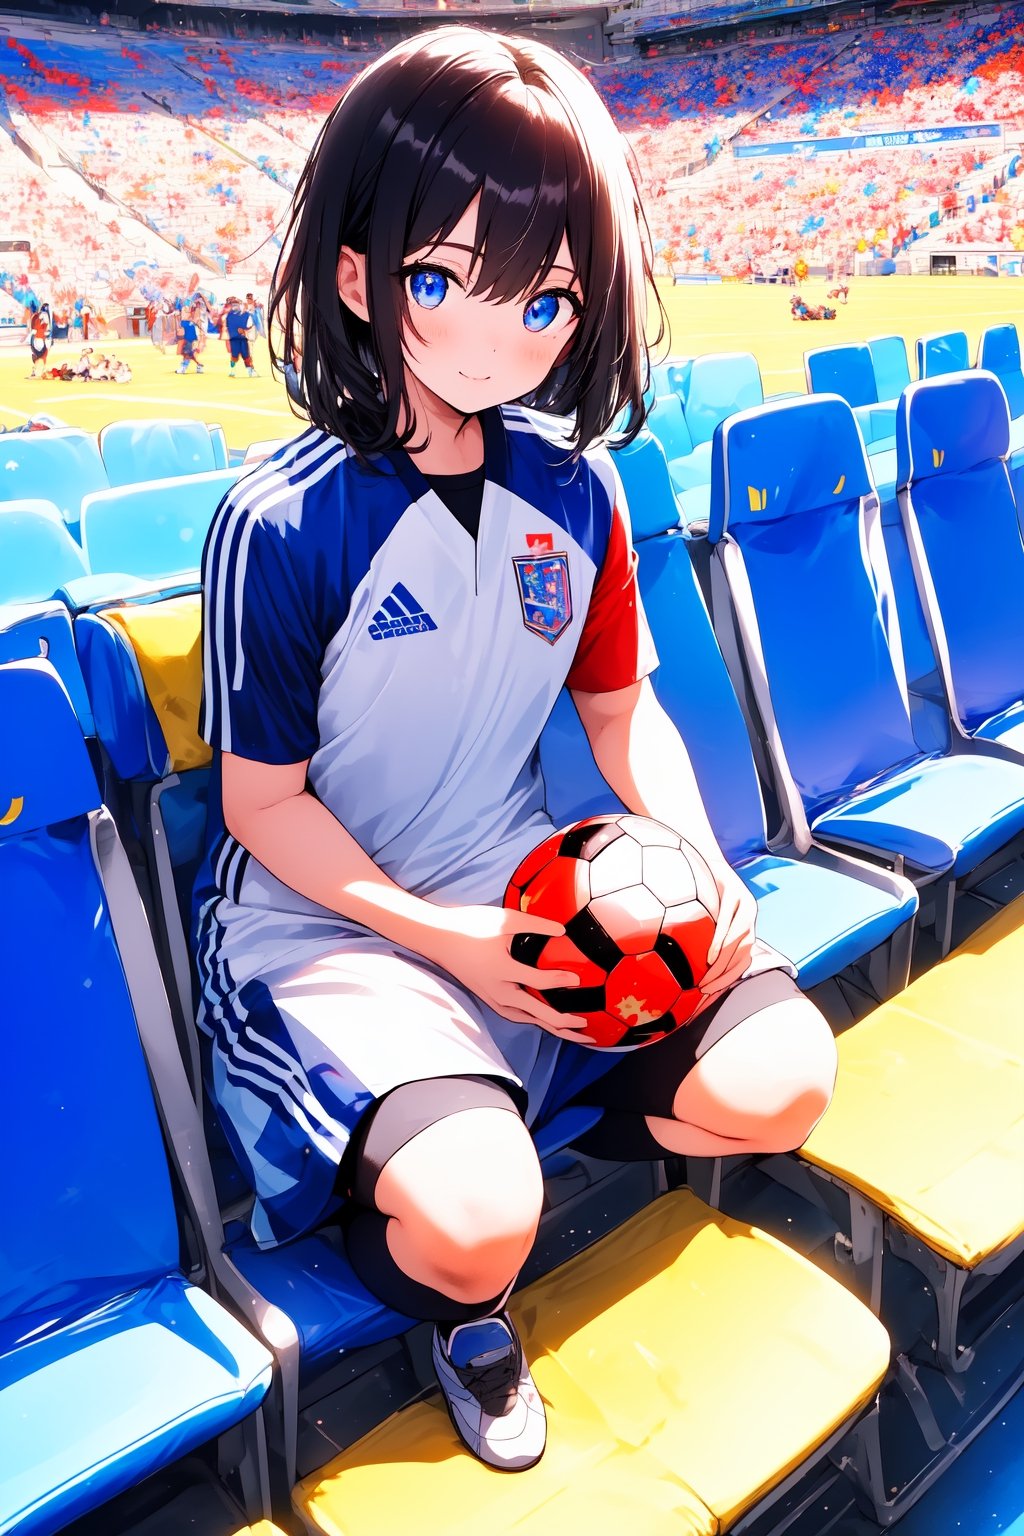 ((masterpiece, best qualit, beautiful detailed eyes, ultra-detailed, finely detail, highres)), 8k, 1 girl, cute, kawaii, black hair, dynamic angle, She is a spectator watching the soccer game, large audience, multiple people, (she is praying), black eye, sitting in the audience seats, Japan national soccer team uniform